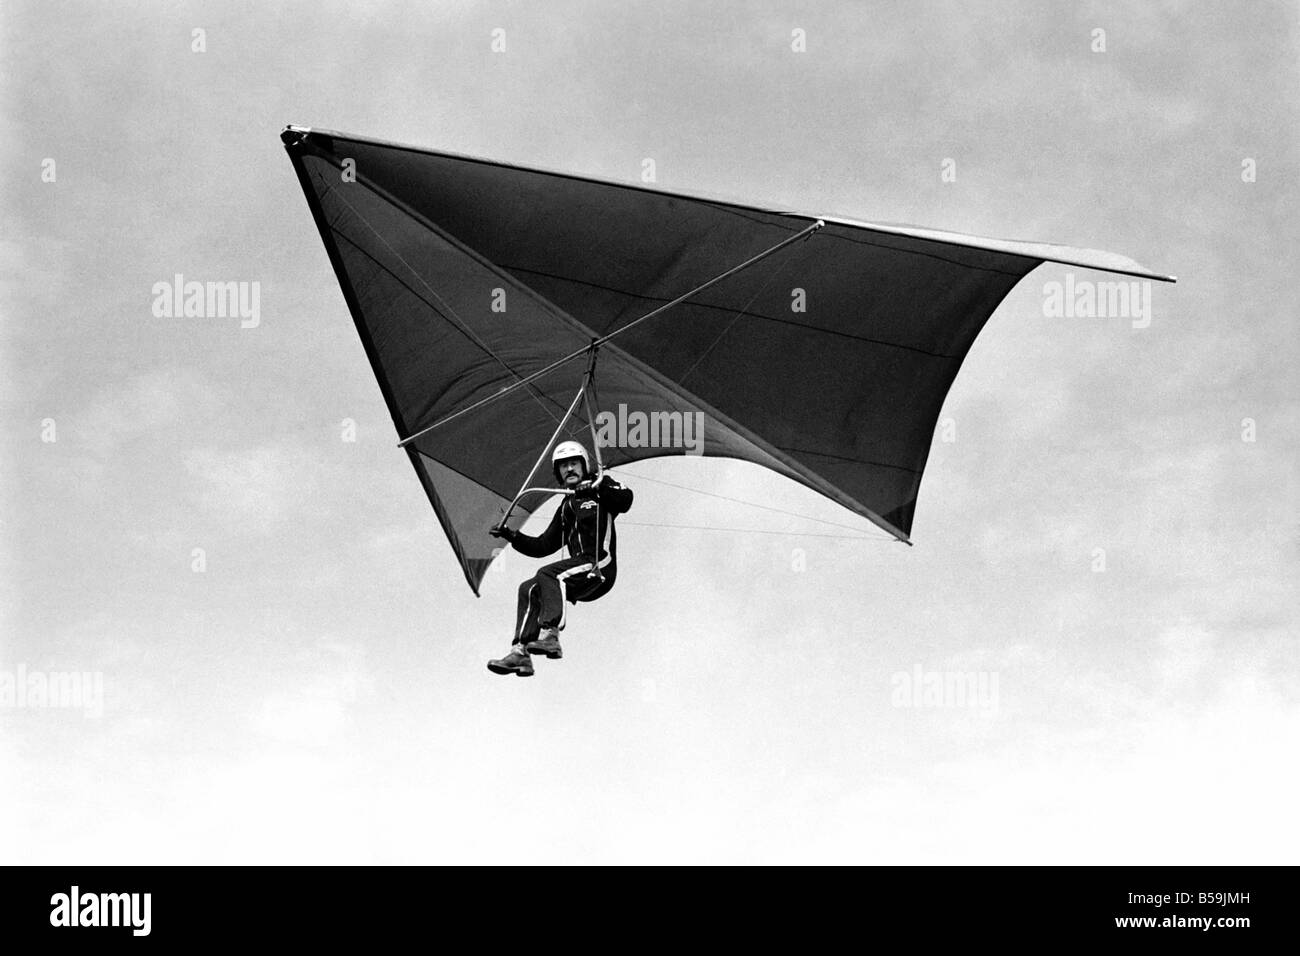 British Kite Team. With the World Hang Gliding Championships taking place in Australia next week, British Team sponsored by B.P. were having last minute get-together this afternoon (Friday) at Marlborough Downs, Wiltshire. March 1975 75-01306-006 Stock Photo